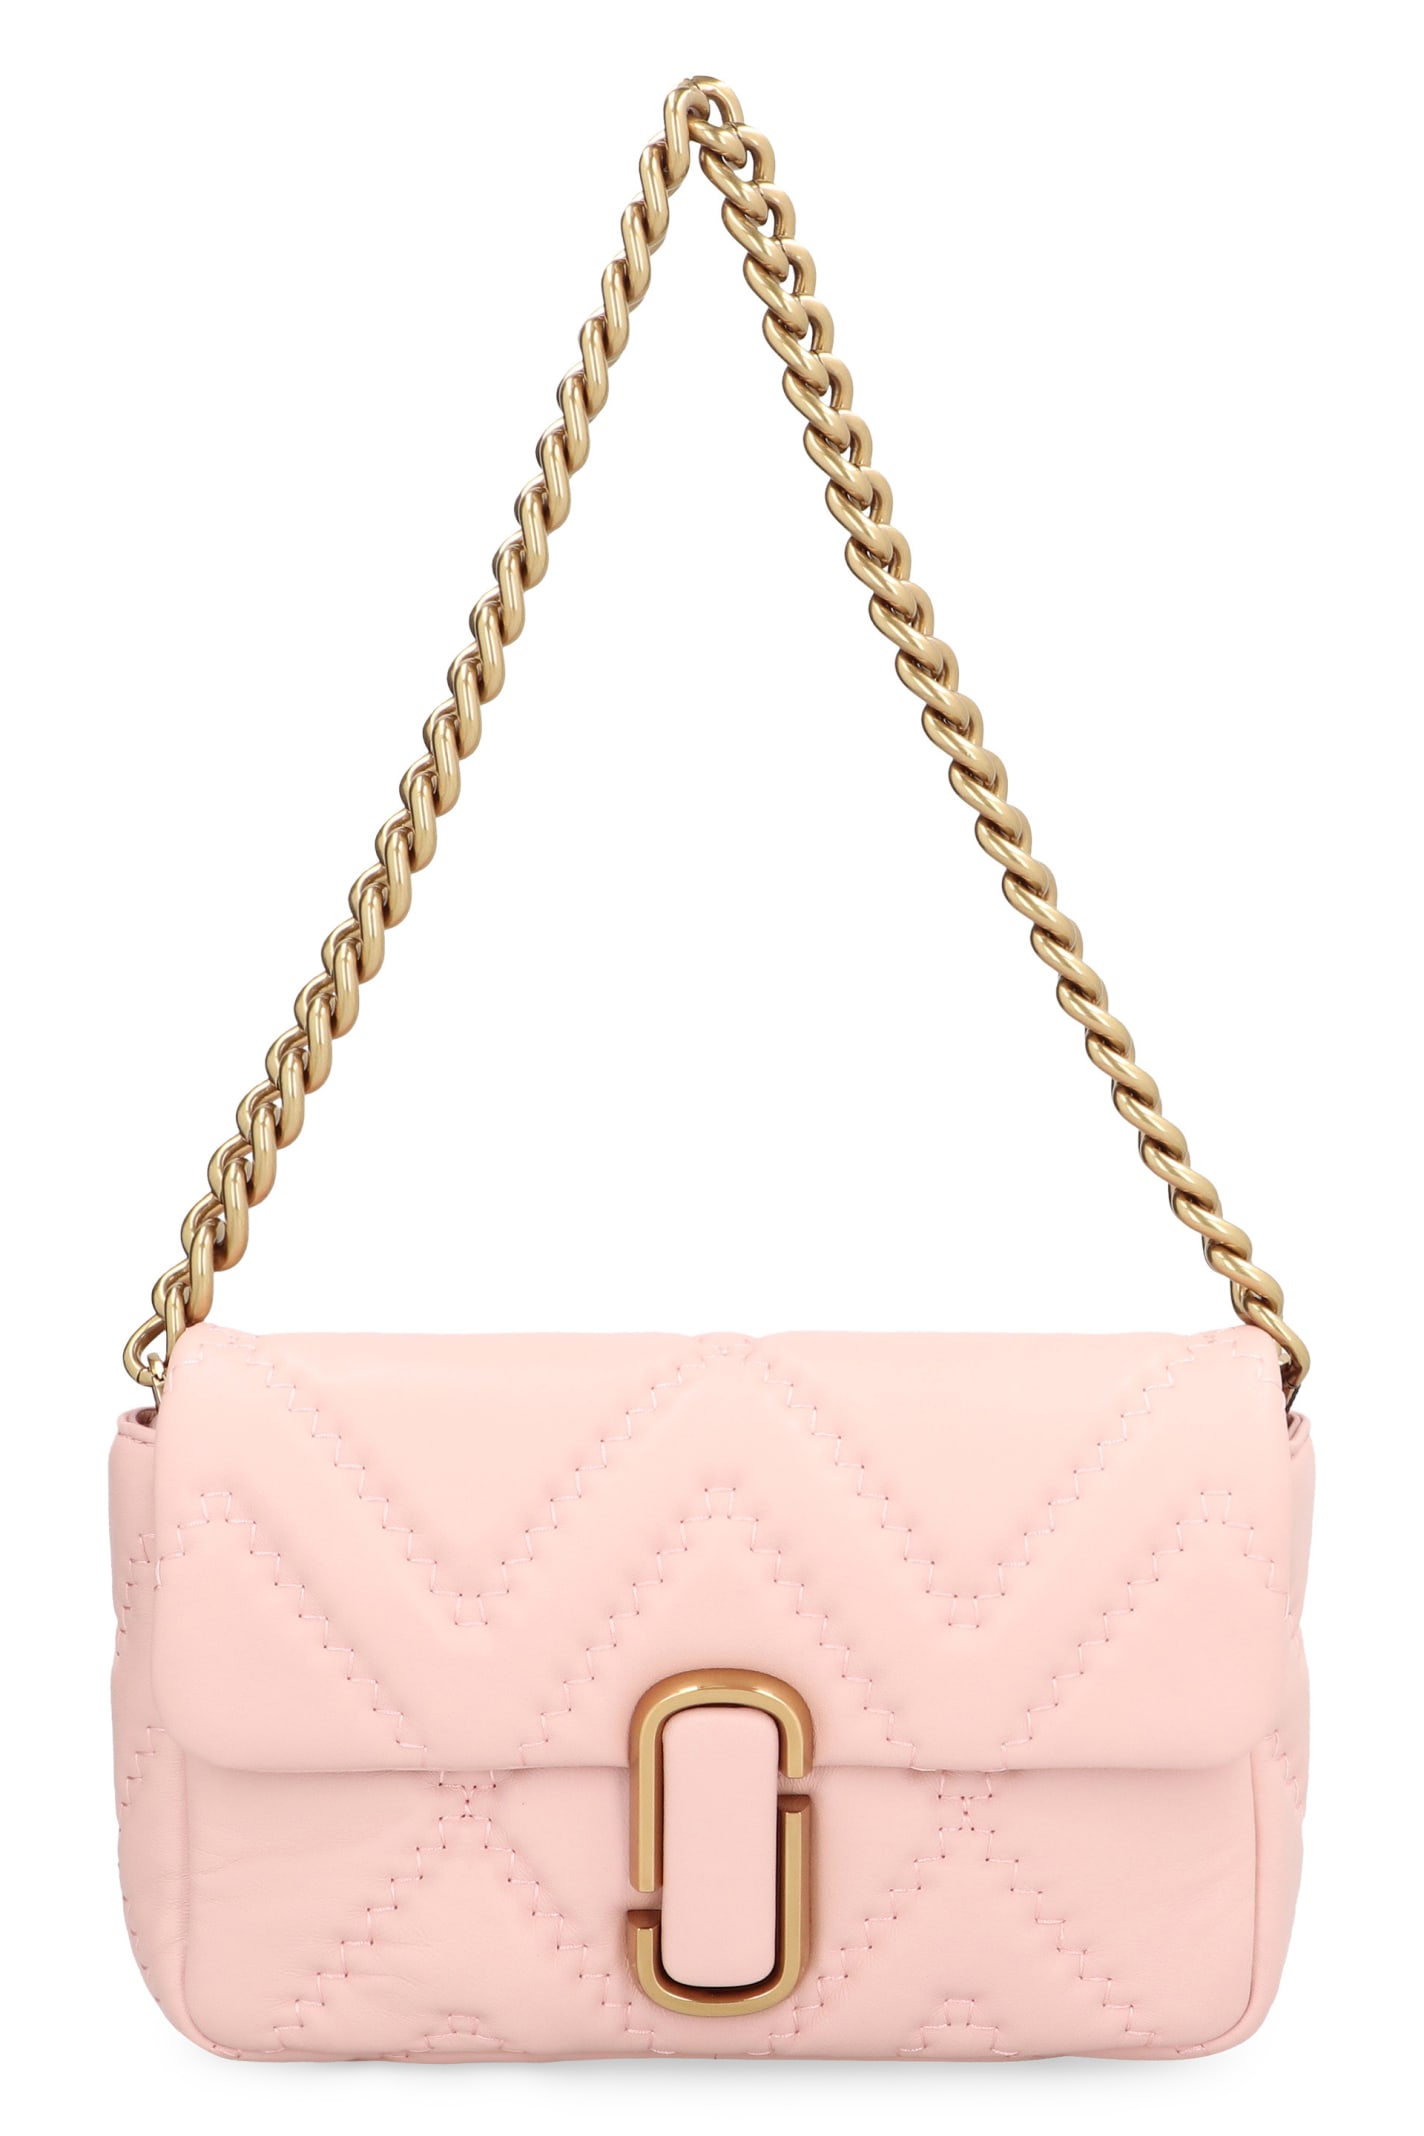 MARC JACOBS BORSA A TRACOLLA J MARC IN PELLE